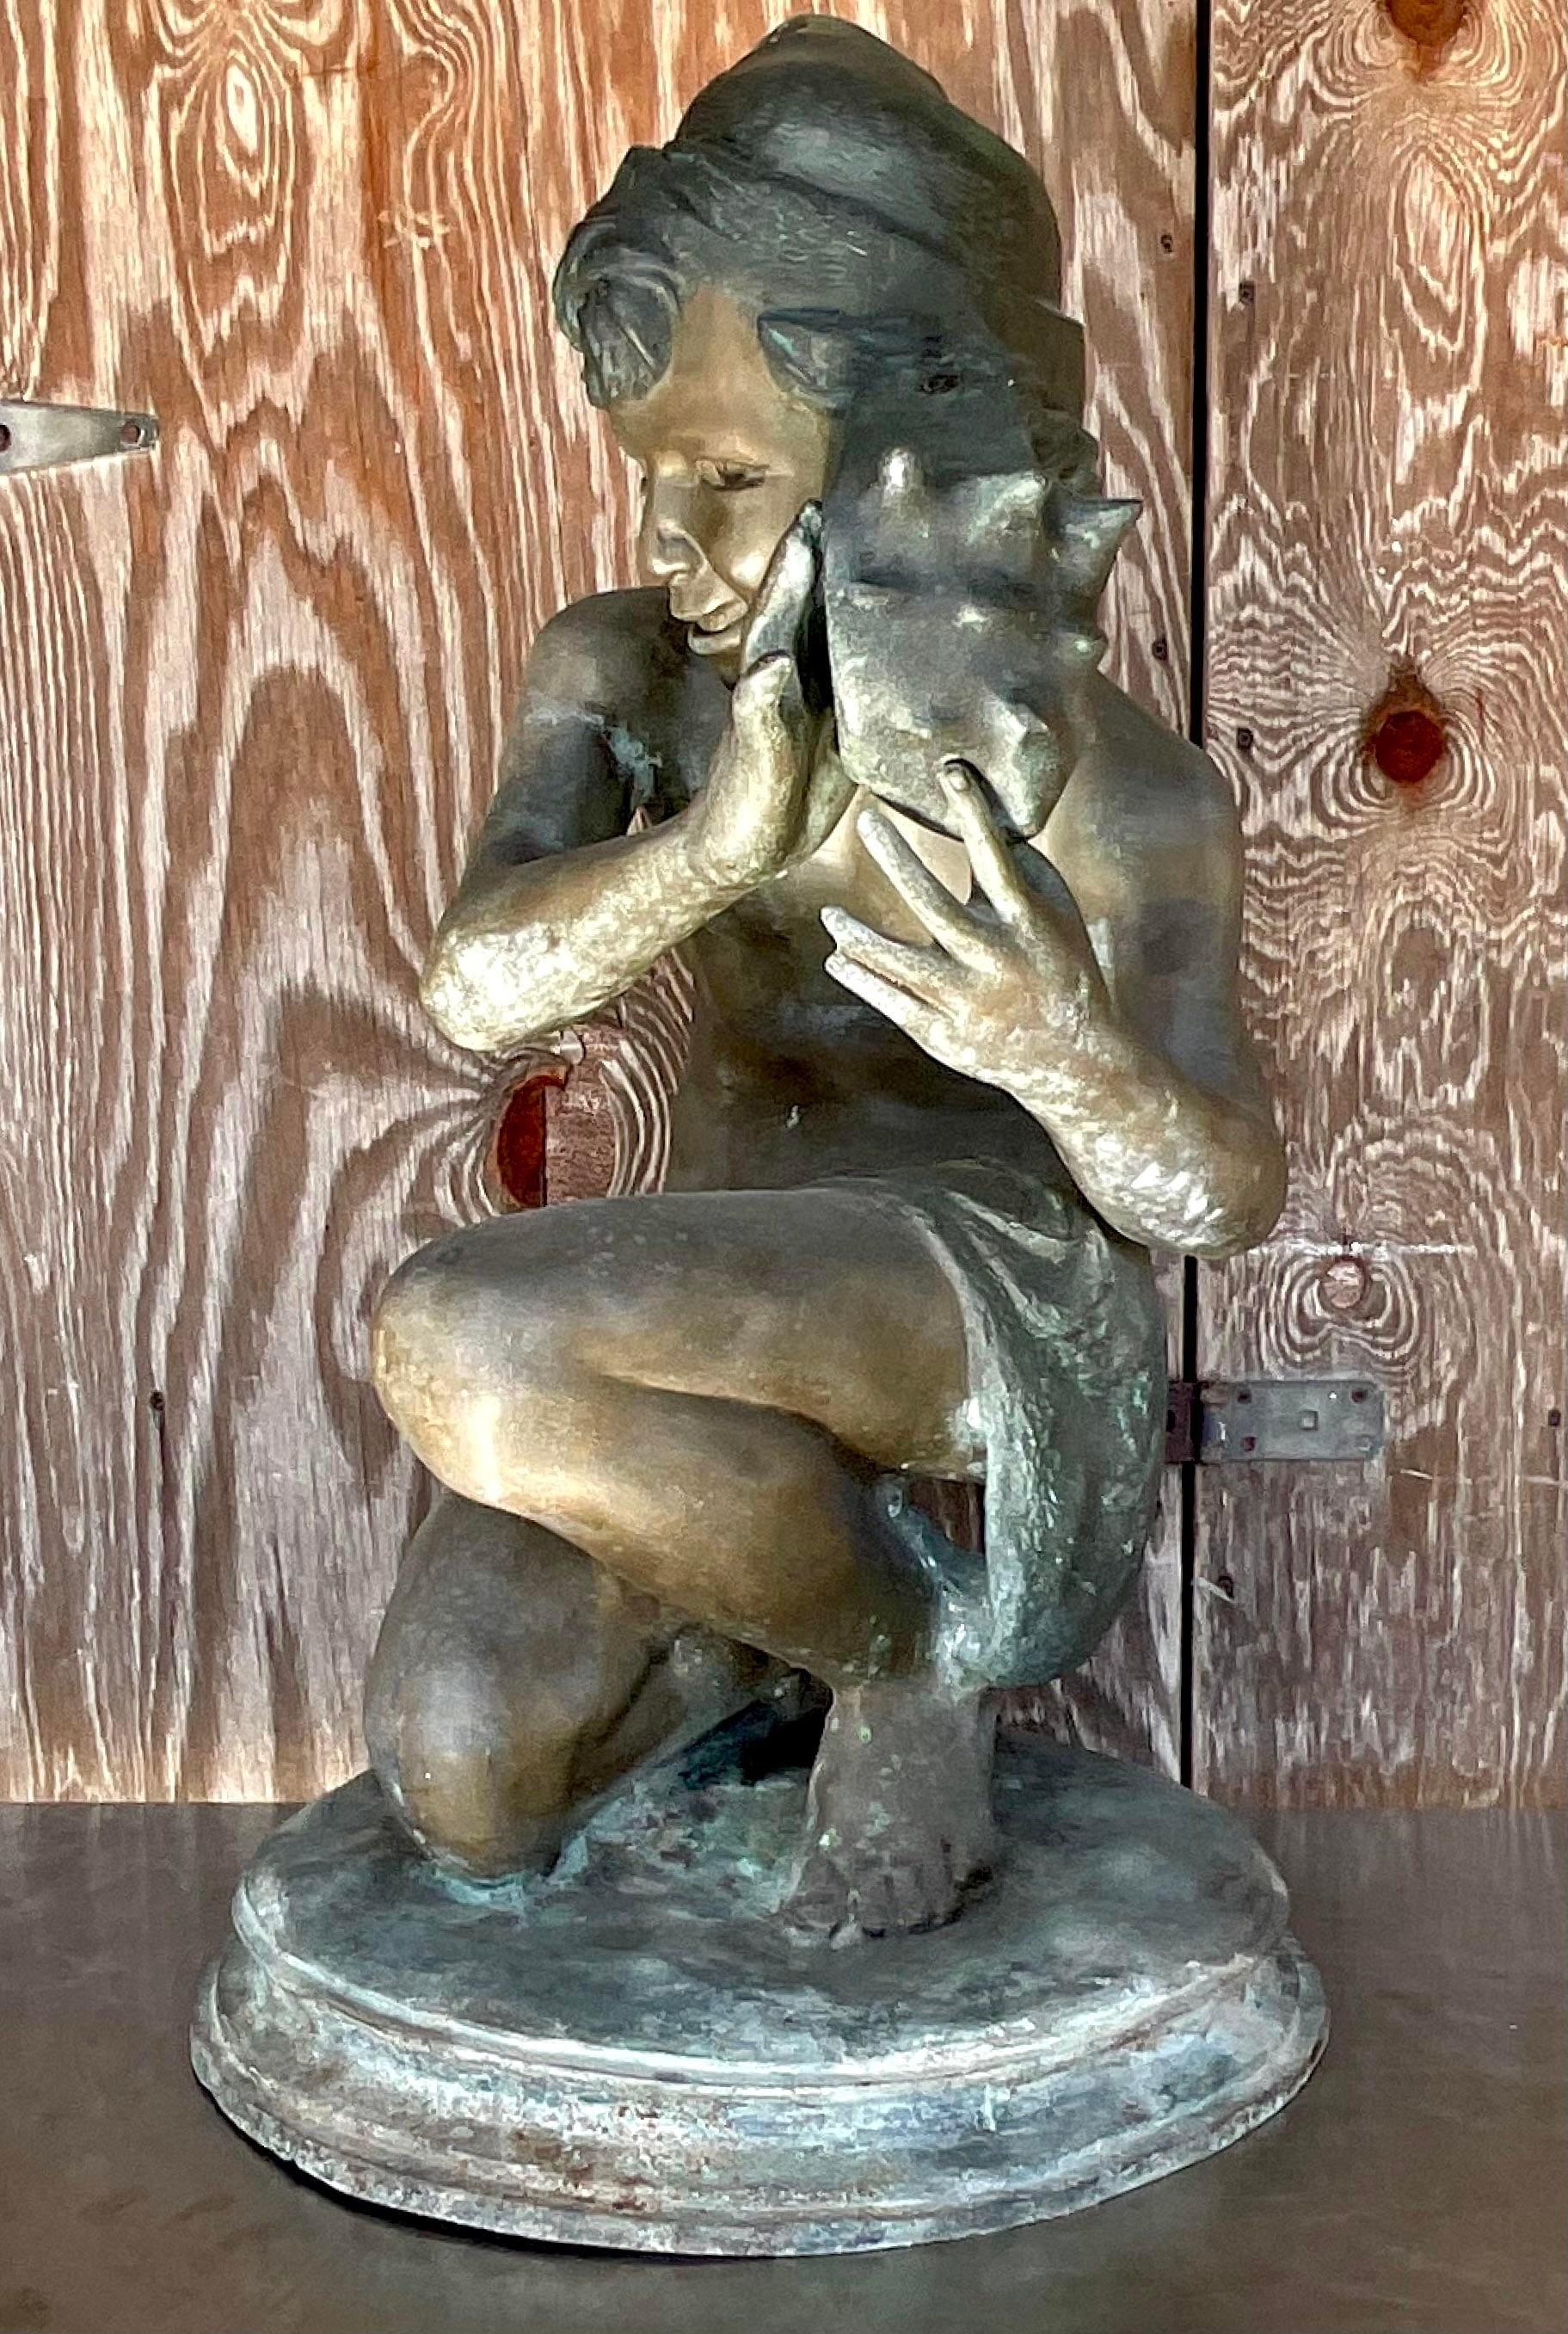 A fabulous vintage Coastal sculpture of young man with shell. Done by the iconic Jean- Baptist Carpeaux. A bronze figure with a beautiful patina from time. Signed on the pedestal. Acquired from a Palm Beach estate.